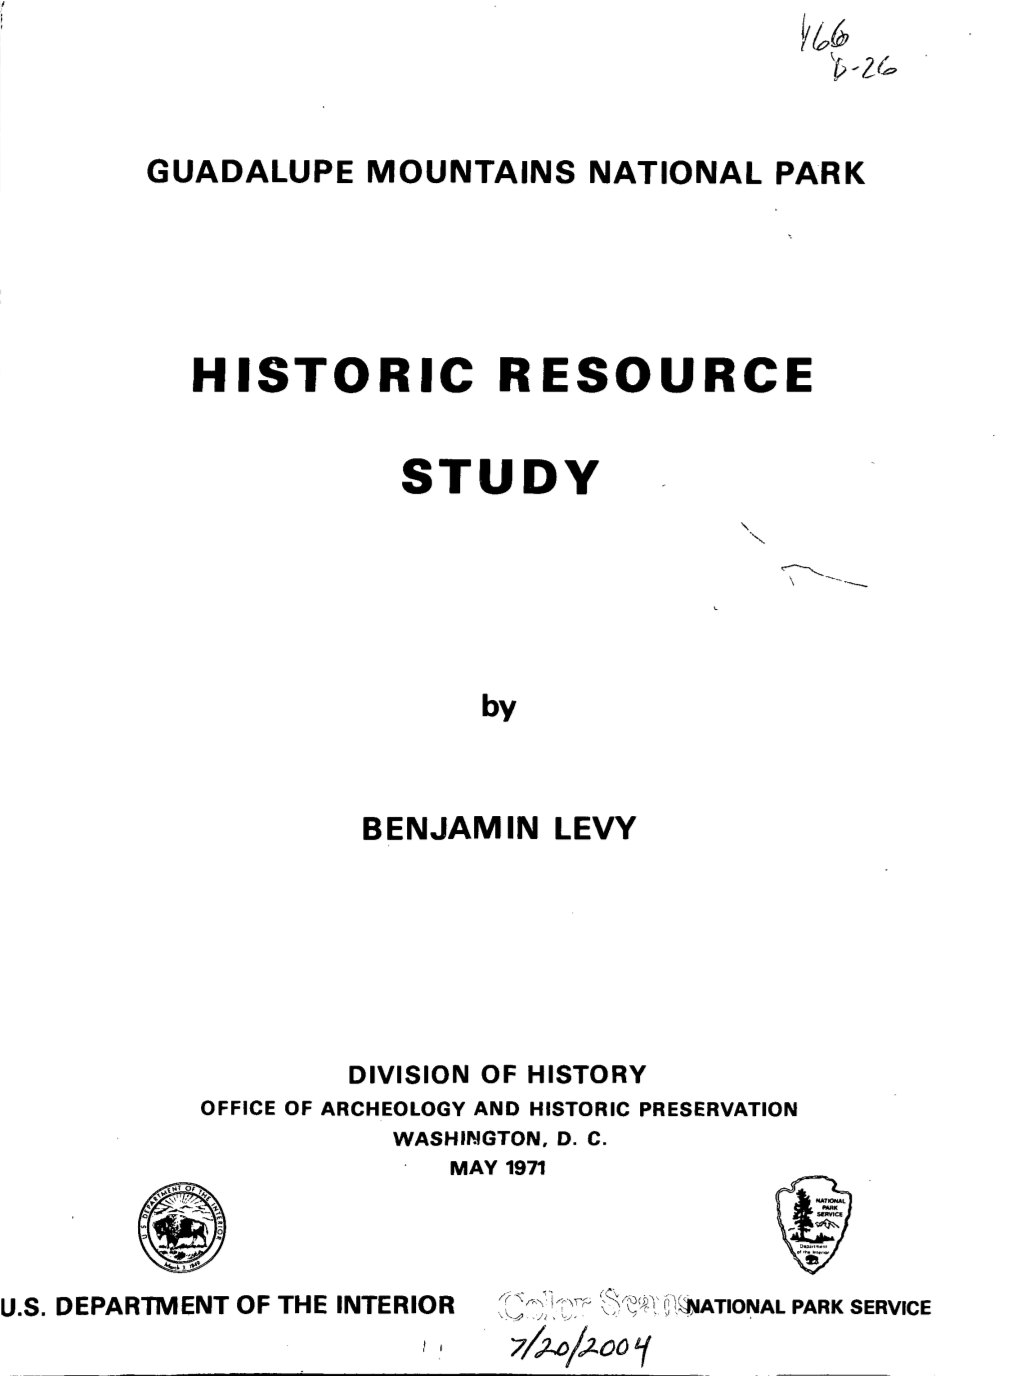 Historic Resource Study: Guadalupe Mountains National Park